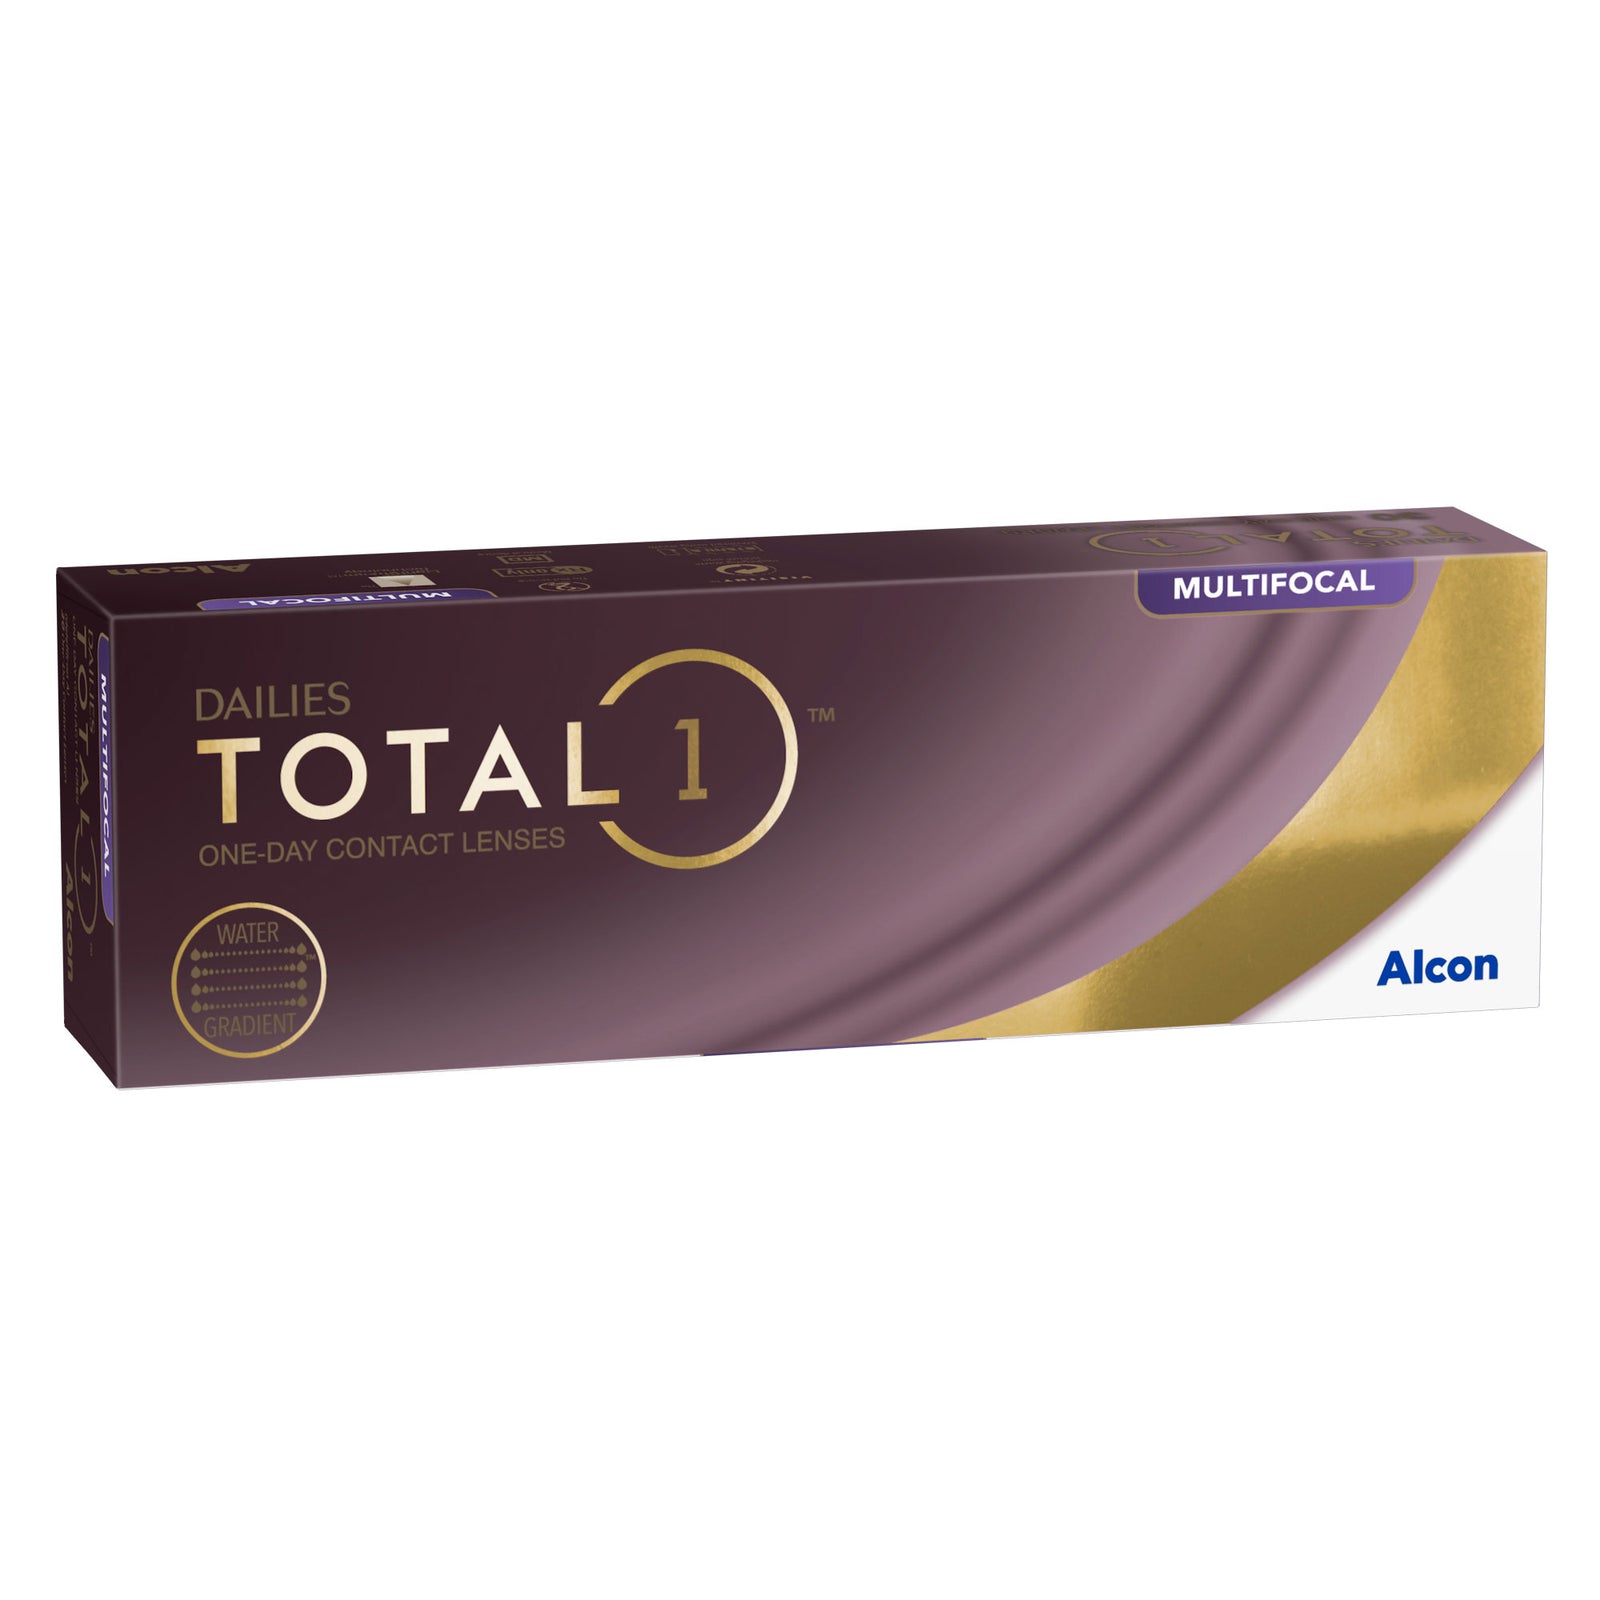 DAILIES : TOTAL1™ Multifocal Contact Lenses – Daily 30 pack